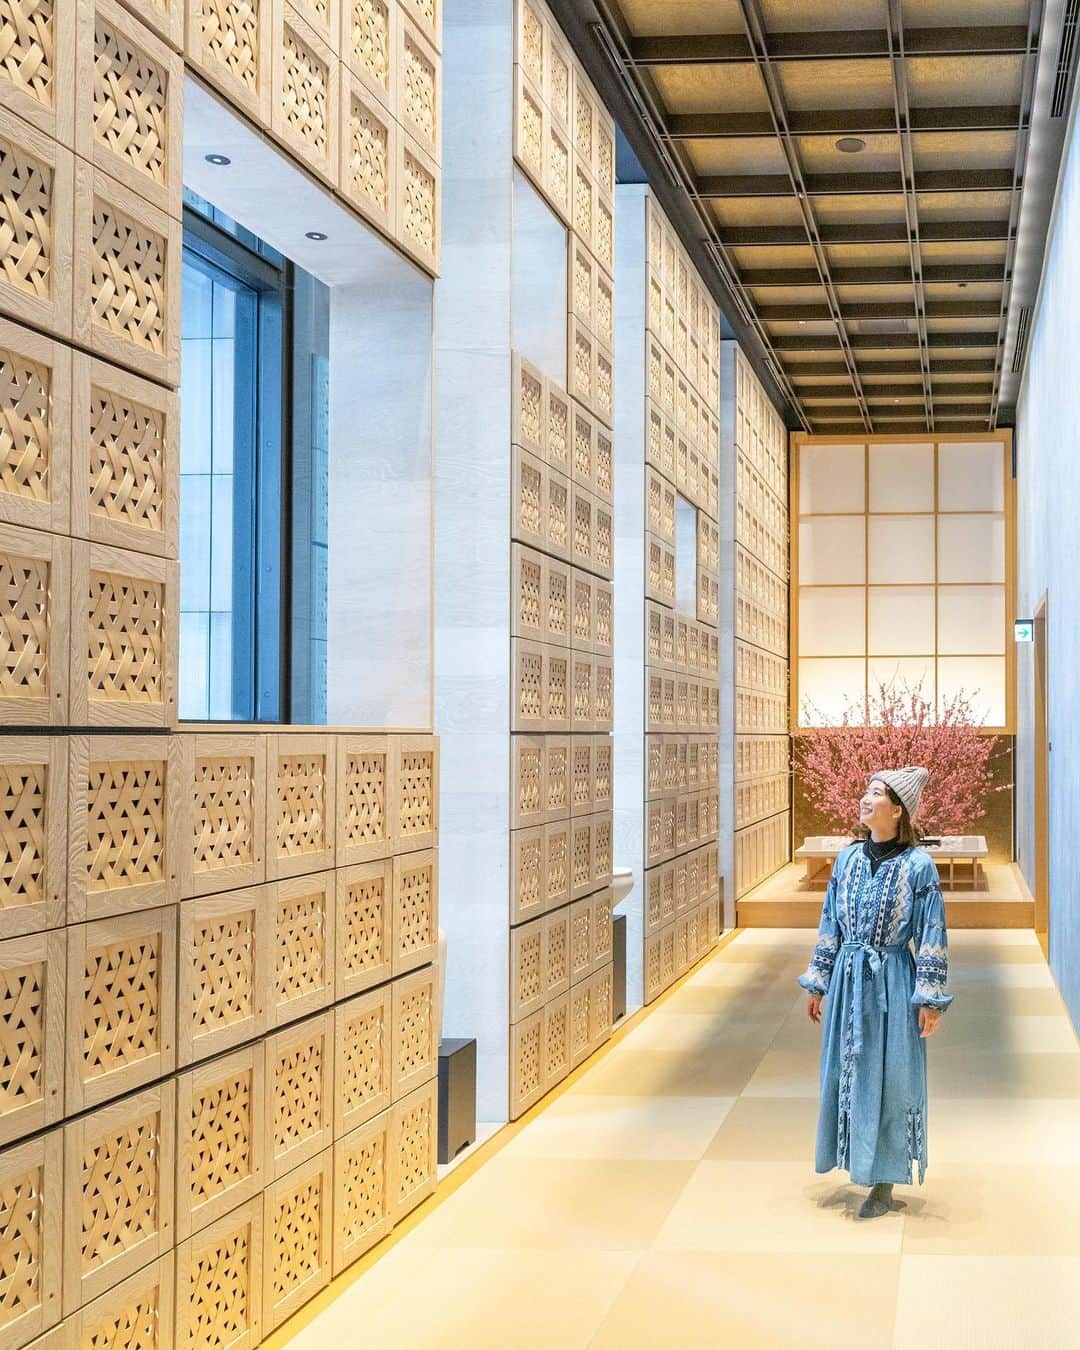 詩歩さんのインスタグラム写真 - (詩歩Instagram)「🌙﻿ ﻿ #HoshinoyaTokyo , the luxury Japanese ryokan in central Tokyo, where I stayed is stylish to the entrance!﻿ ﻿ It is this sight that spreads in front of you when you enter the entrance door. It is woven with bamboo spread all over the wall. What do you think this is?﻿ ﻿ Actually, this is all succulent! In Hoshinoya Tokyo, take off your shoes at the entrance and spend the whole time barefoot in the hall. The shoes are stored in this clog box all over the wall. (Of course, the staff took it, so I didn't touch it myself) In the hall, the entrance, as well as the elevators, corridors and rooms are all tatami. Unlike a hotel that has shoes in the room, I thought it was really like relaxing at home.﻿ ﻿ Vlog on Youtube! There are plenty of room introductions, amenities, open-air baths, dinners, and free activities. English subtitles are available, so please check it out on Youtube! (Link on bio)﻿ ﻿ 🌙﻿ ﻿ 先日宿泊した #星のや東京 は、玄関までおしゃれ！﻿ ﻿ 入口のドアを入ると目の前に広がるのが、この光景です。﻿ 壁一面に広がる竹で編まれたもの。一体なんだと思いますか？﻿ ﻿ 実はこれ、全部くつばこ！﻿ 星のや東京は入口で靴を脱いで、館内はすべてハダシ。﻿ その靴が収納されているのが、この壁一面の下駄箱なんです。﻿ （もちろんスタッフさんがとってくれるので、自分で触れることはなかったけどね🙊）﻿ ﻿ 館内は入口はもちろん、エレベーターも廊下もお部屋もぜーんぶ畳。﻿ ﻿ 部屋の中まで靴なホテルと違って、本当に家のようにくつろげるってこういうことだよな〜〜〜と思いました。﻿ ﻿ ﻿ 🎬﻿ ﻿ 星のや東京で１泊２日過ごした様子をVlogでまとめています！﻿ ﻿ 部屋の紹介やアメニティ、露天風呂、夕食、無料アクティビティなど盛りだくさんです💪﻿ ﻿ 全編音声と字幕（日英）つけてるので、ラジオかわりにでもぜひ！﻿ ﻿ YoutubeにUPしているのでぜひご覧ください☺﻿ （チャンネルはプロフィール欄にURLを貼っています〜）﻿ ﻿ ﻿ 【星のや東京】江戸の風情が感じられる1泊2日の滞在をご紹介｜Vlog﻿ https://youtu.be/0DPr_yRPm_Q﻿ ﻿ ﻿ 撮影協力： @hoshinoya.official @hoshinoresorts.official﻿ ﻿ ﻿ 📍星のや東京／東京﻿ 📍Hoshinoya Tokyo／Tokyo Japan﻿ ﻿ ﻿ ©︎Shiho/詩歩﻿」3月21日 15時10分 - shiho_zekkei